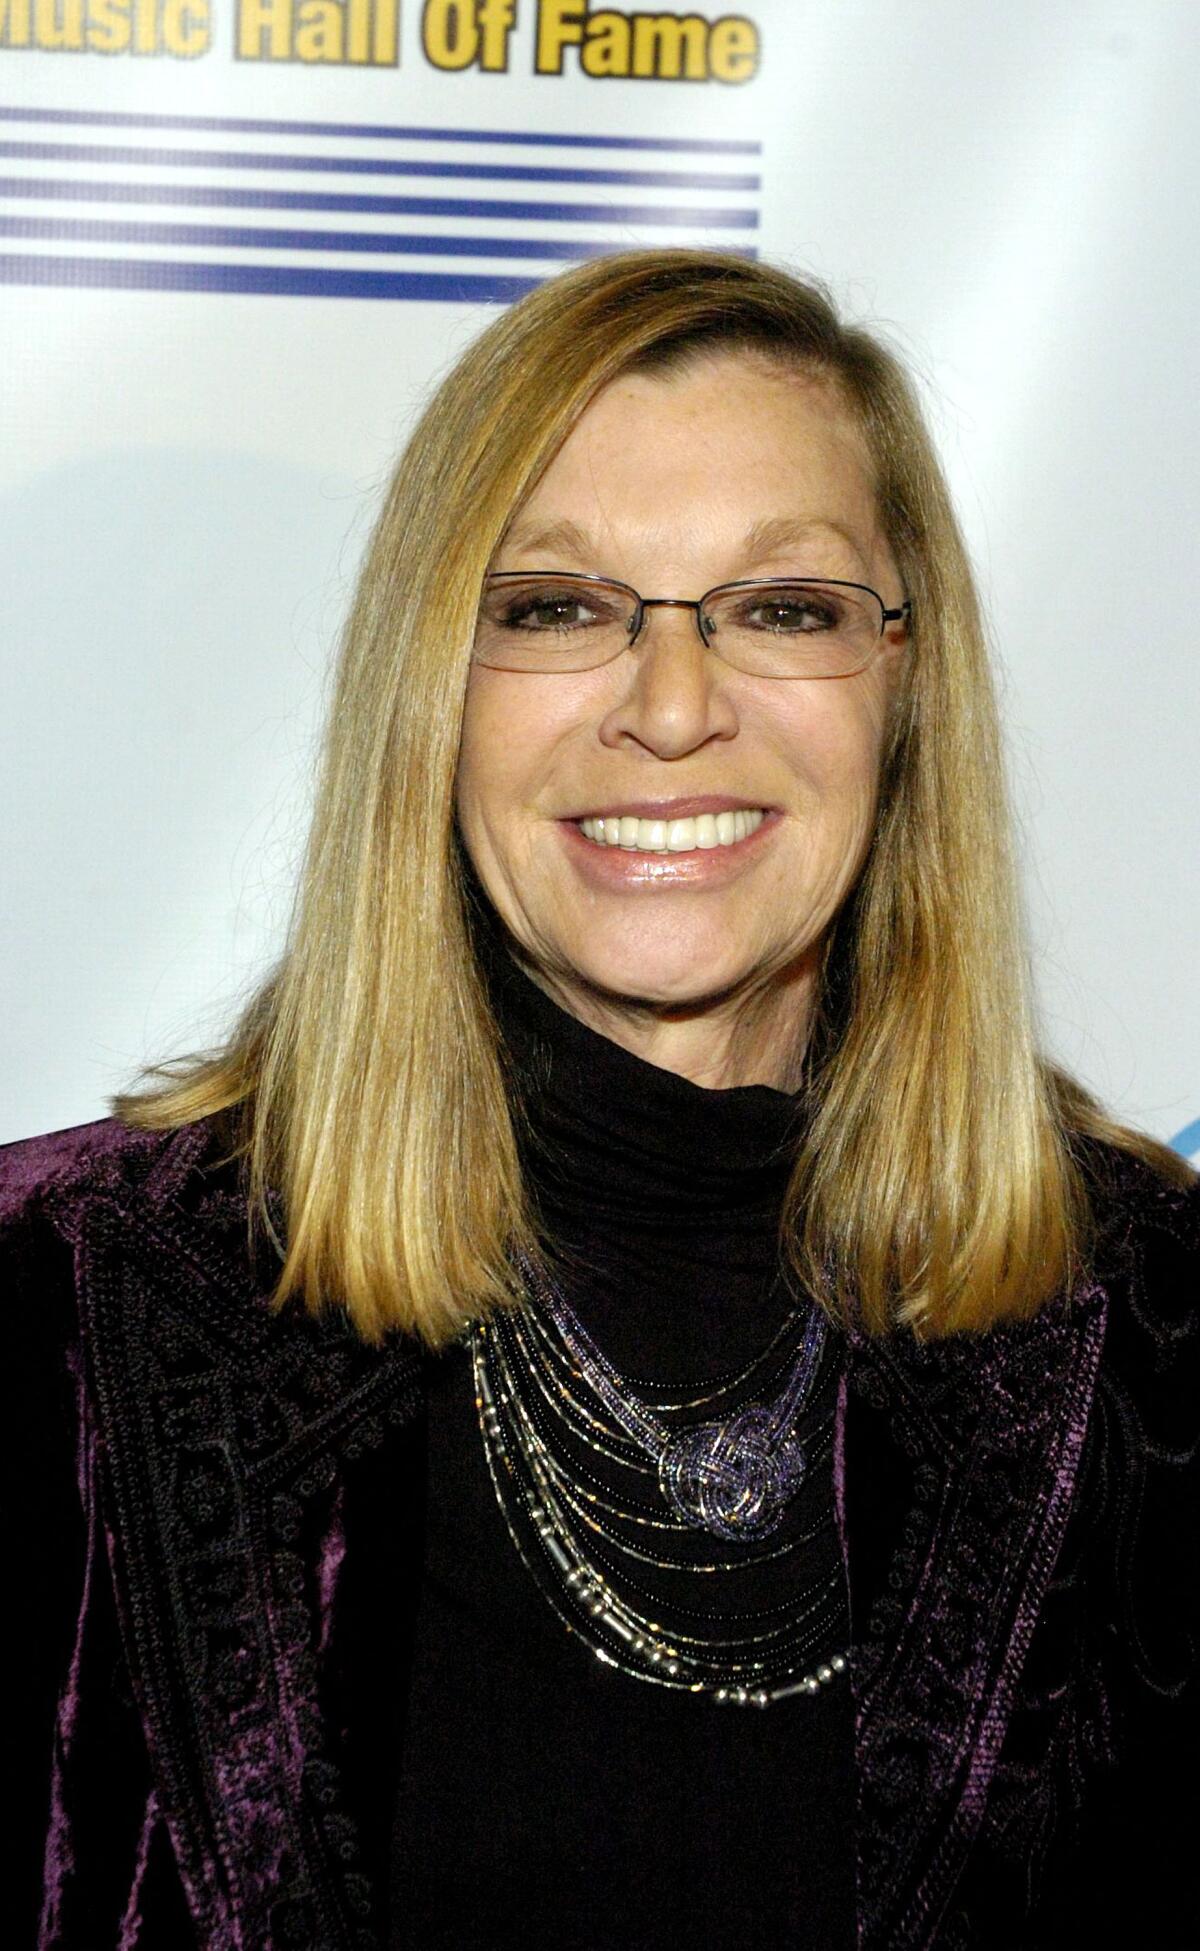 A woman with long brown hair and dressed in a black suit smiles.